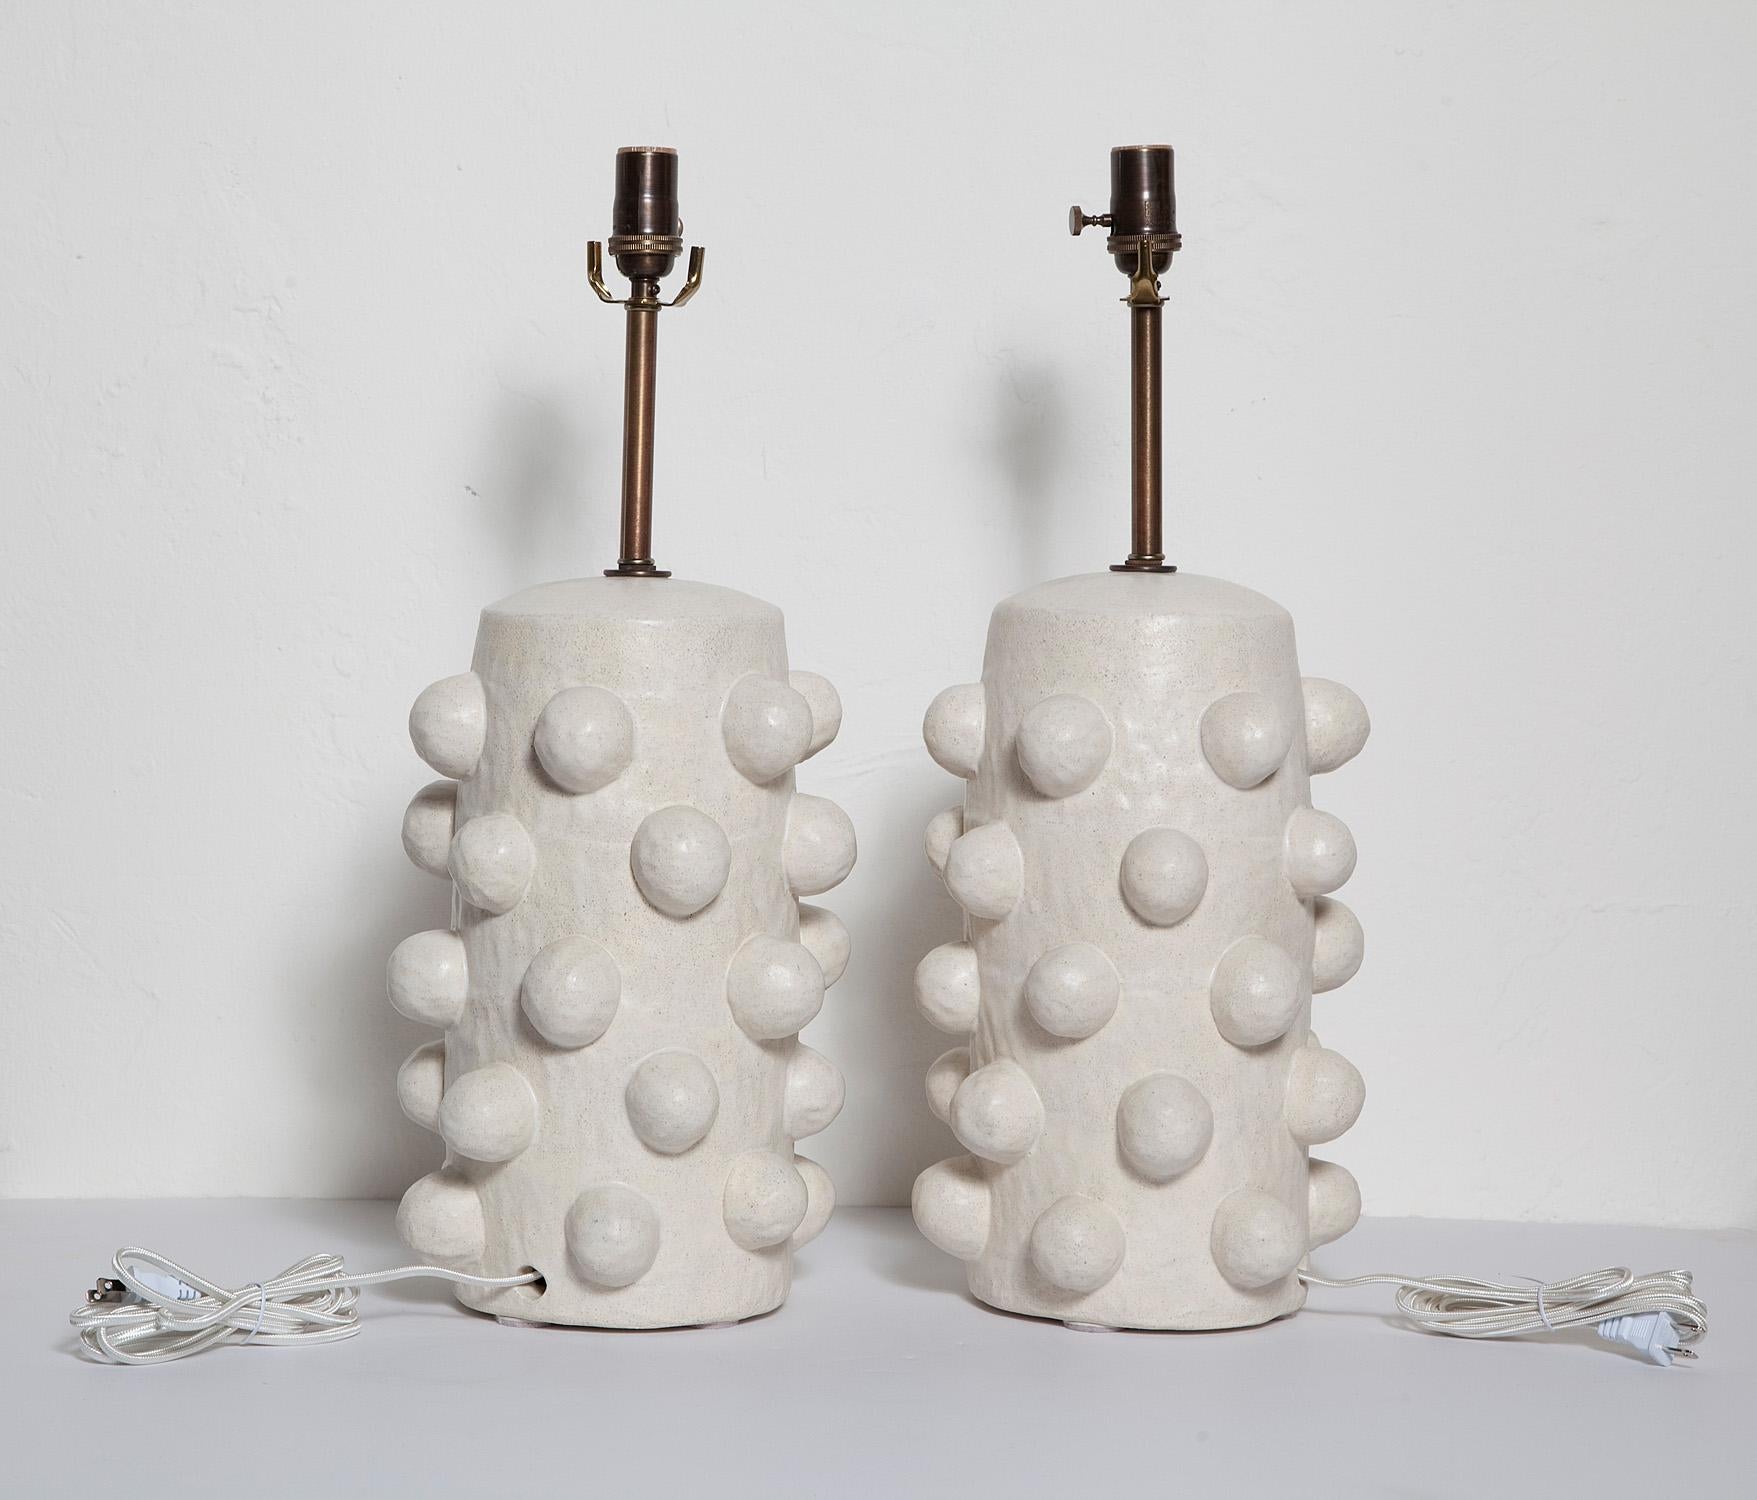 Organic Modern Handcrafted Glazed Stoneware Lamps by Priscilla Hollingsworth for Stripe